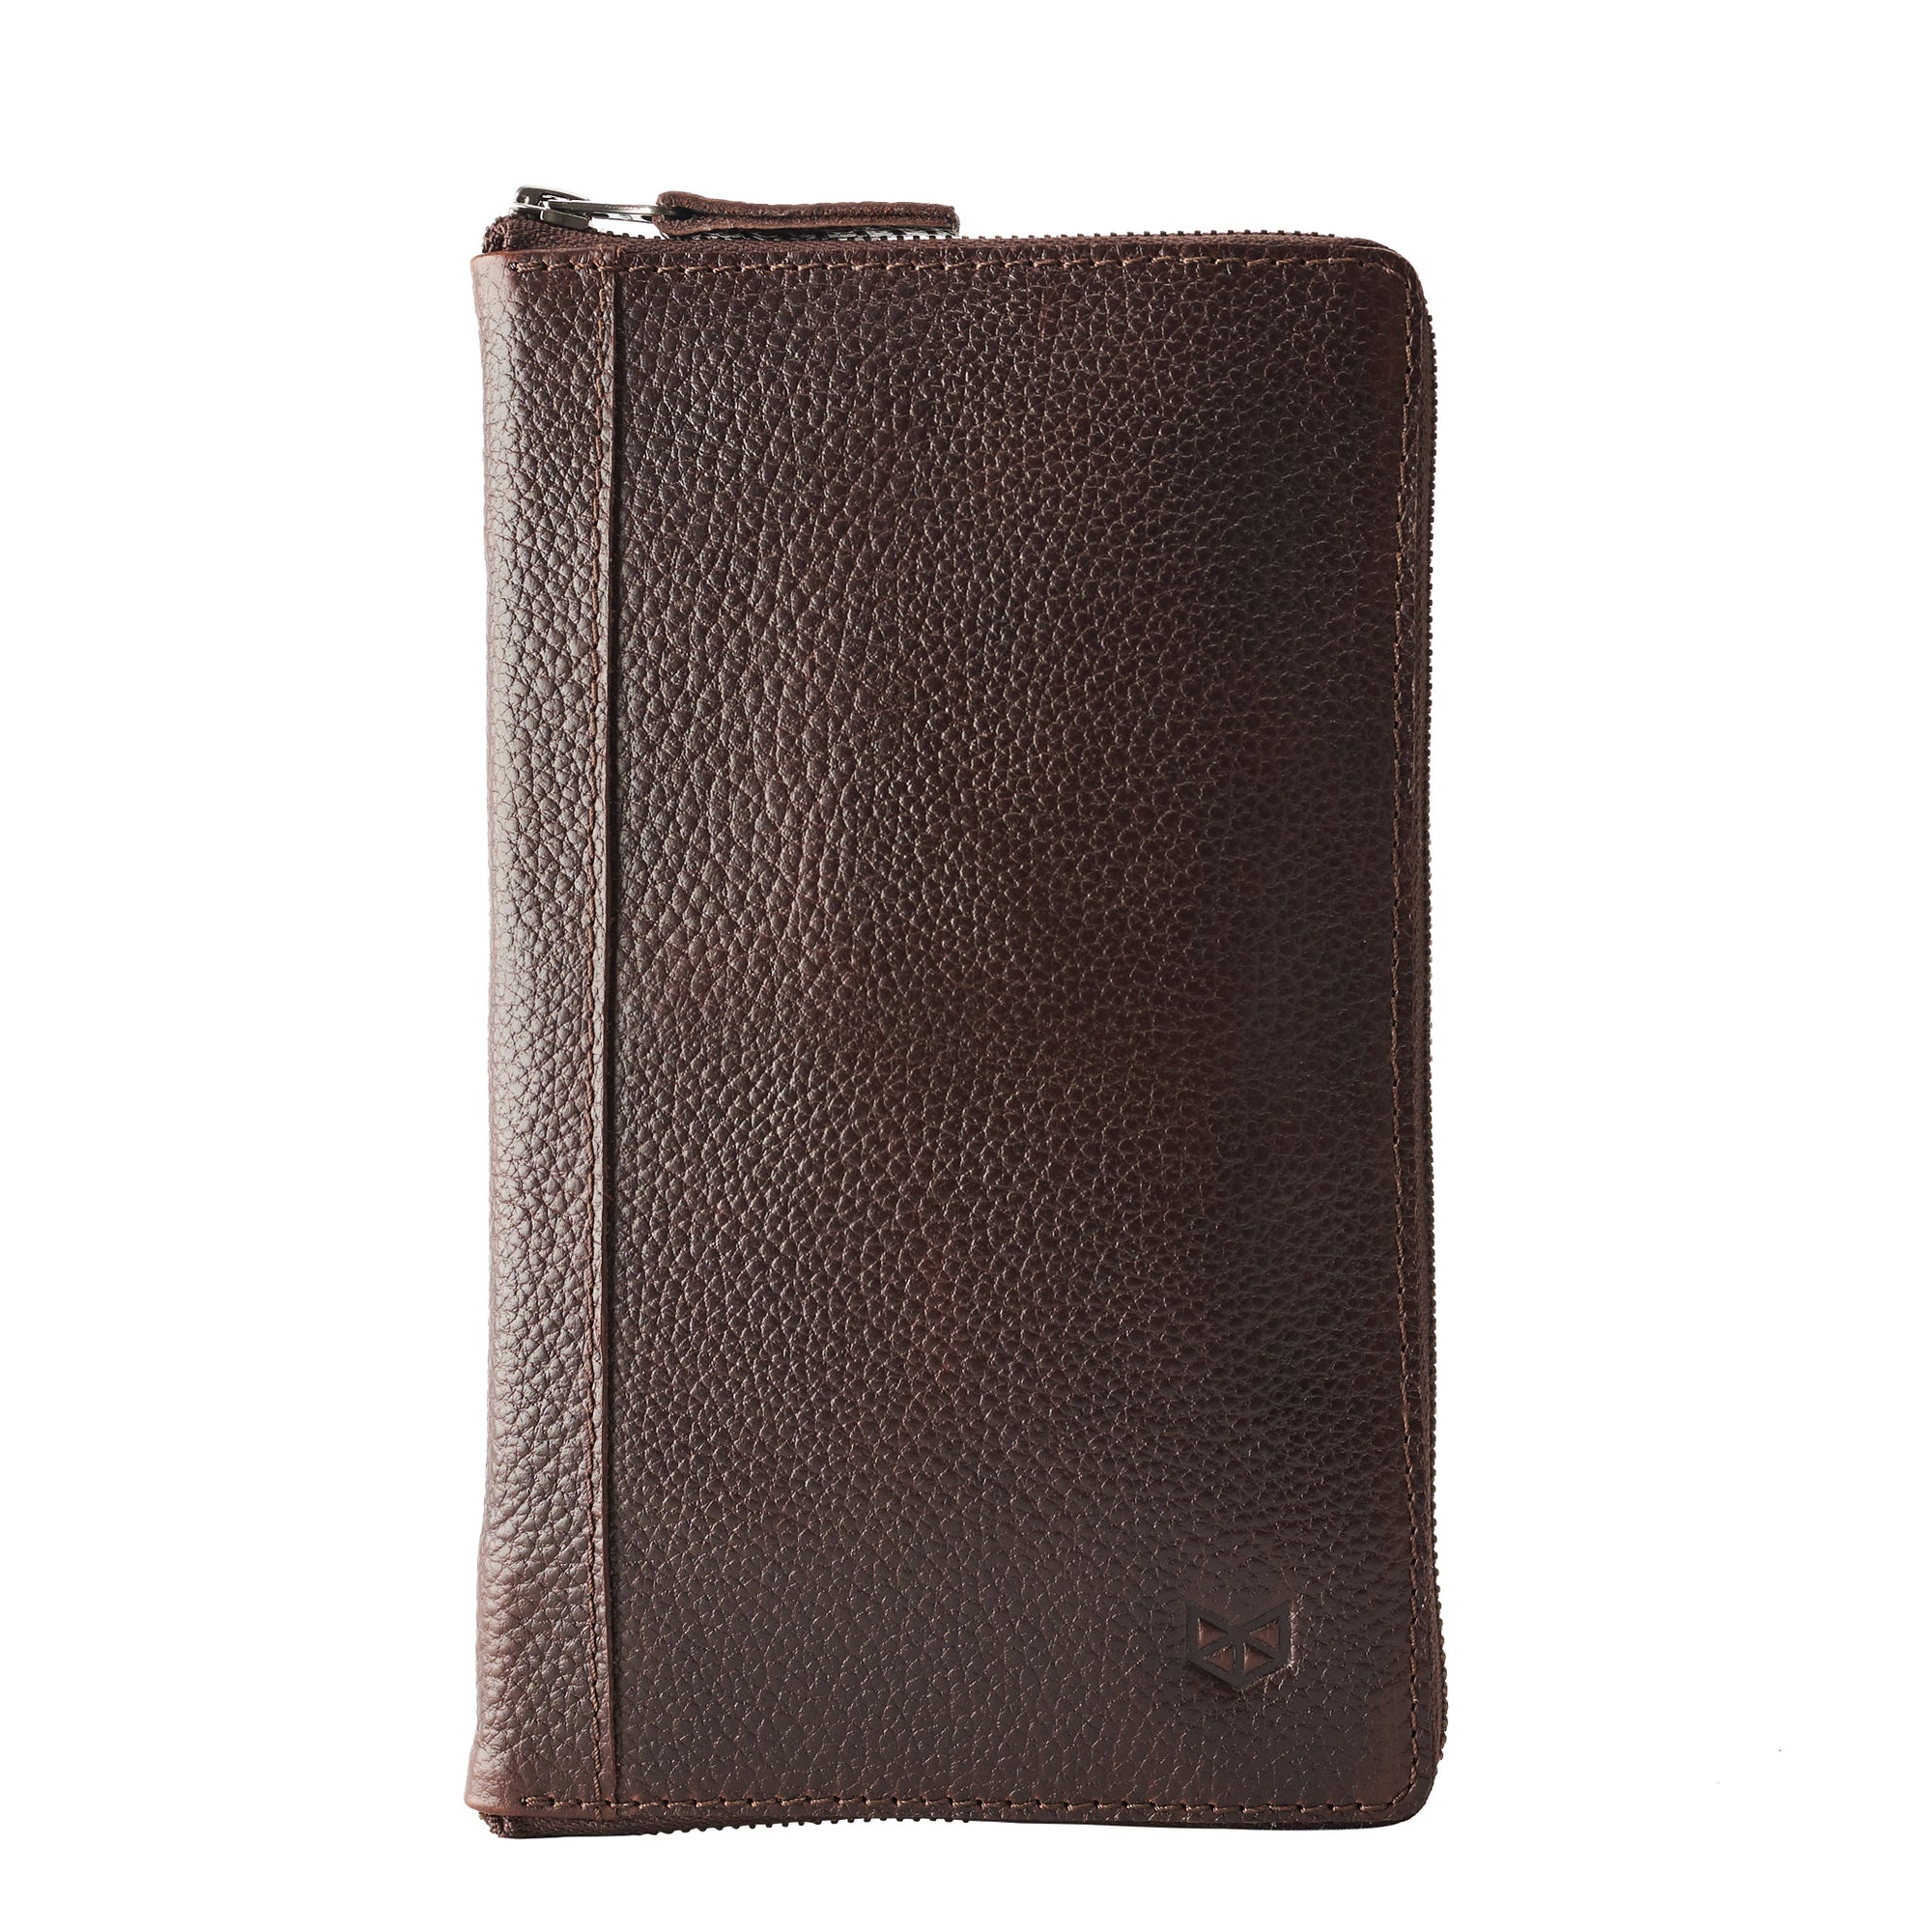 Dark brown. Dark Brown leather passport wallet. Perfect for travelers. Gift for men by Capra Leather.